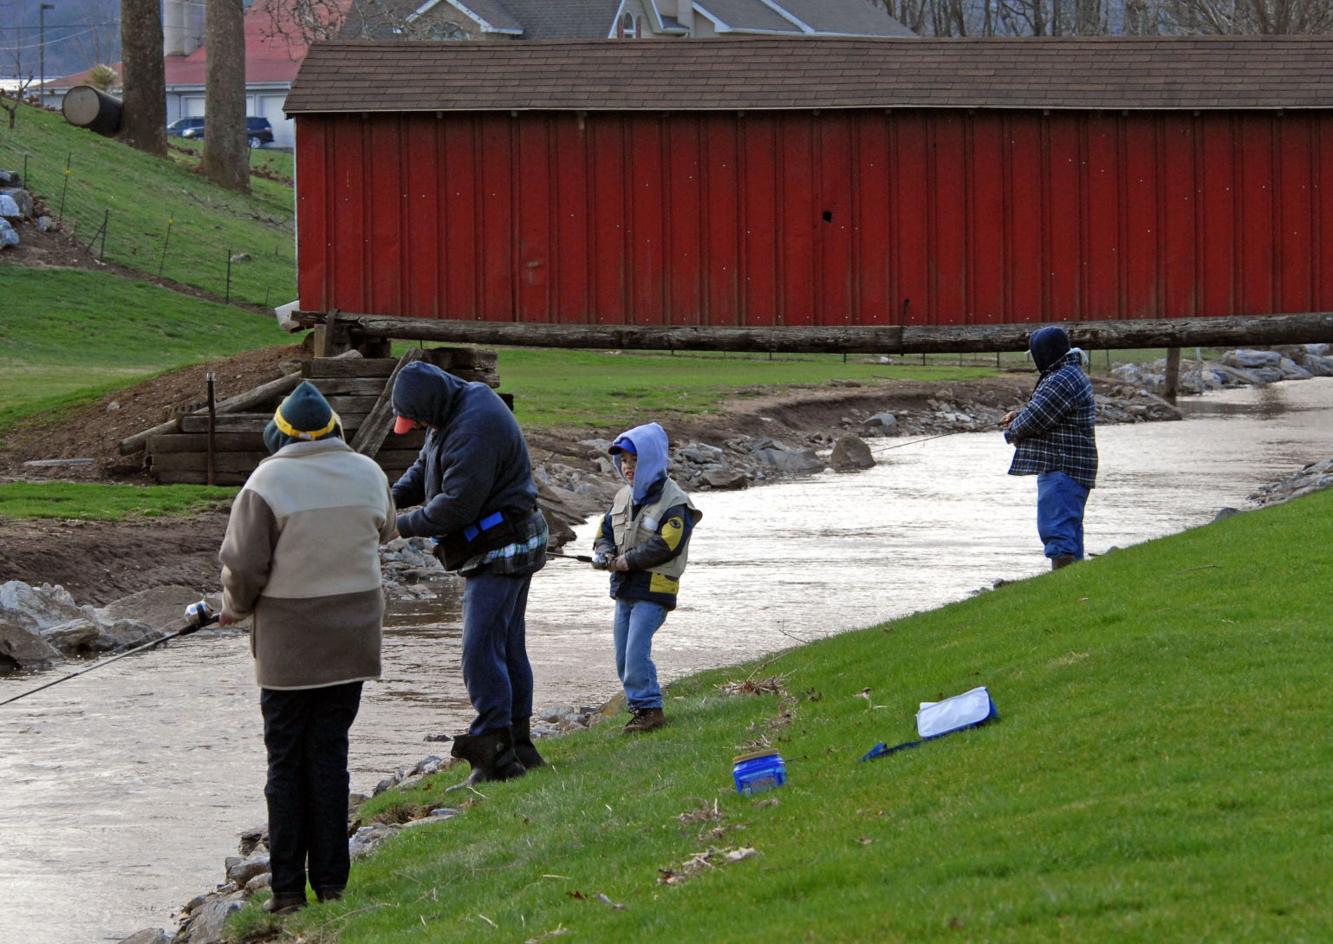 Pennsylvania trout-stocking schedules released | Outdoors | lancasteronline.com